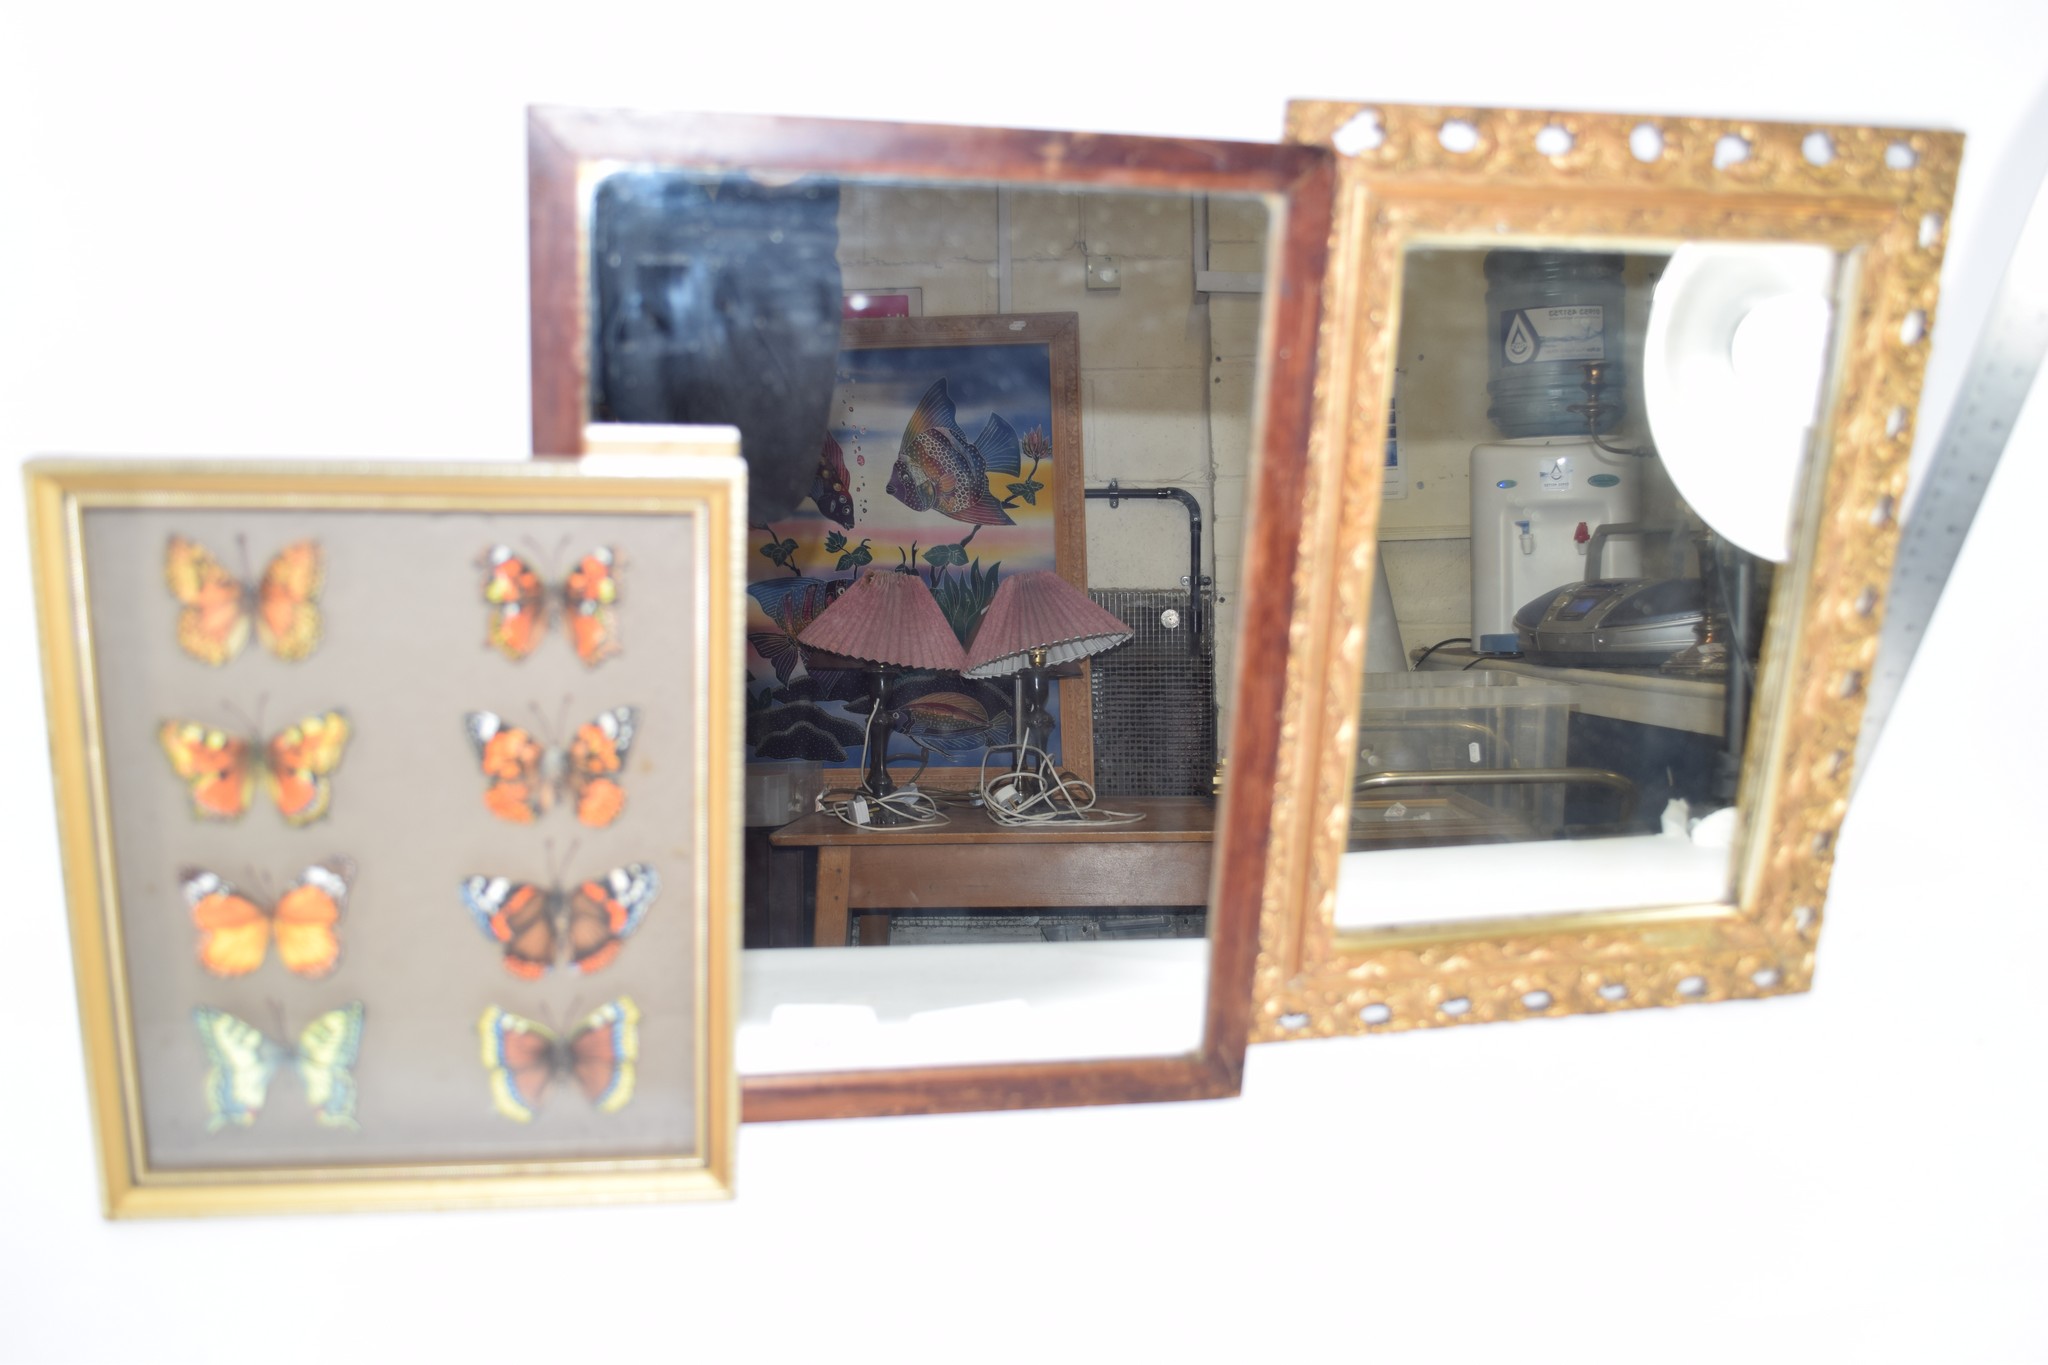 TWO MIRRORS, ONE IN WOODEN FRAME THE OTHER IN GILT FRAME AND COLLECTION OF BUTTERFLIES IN WOODEN